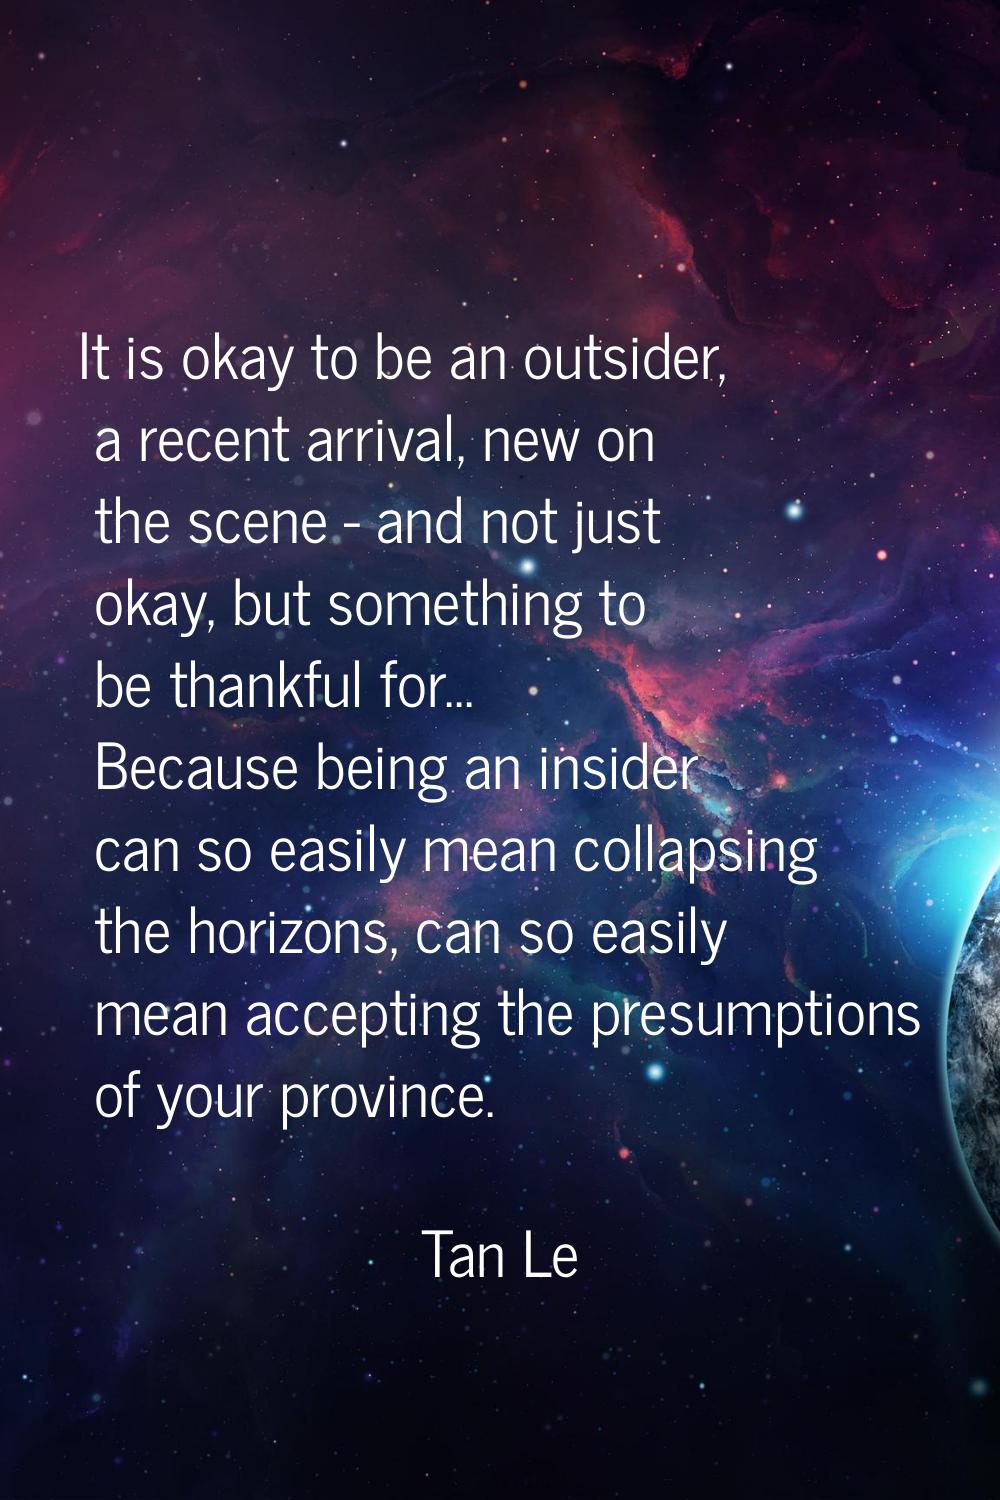 It is okay to be an outsider, a recent arrival, new on the scene - and not just okay, but something